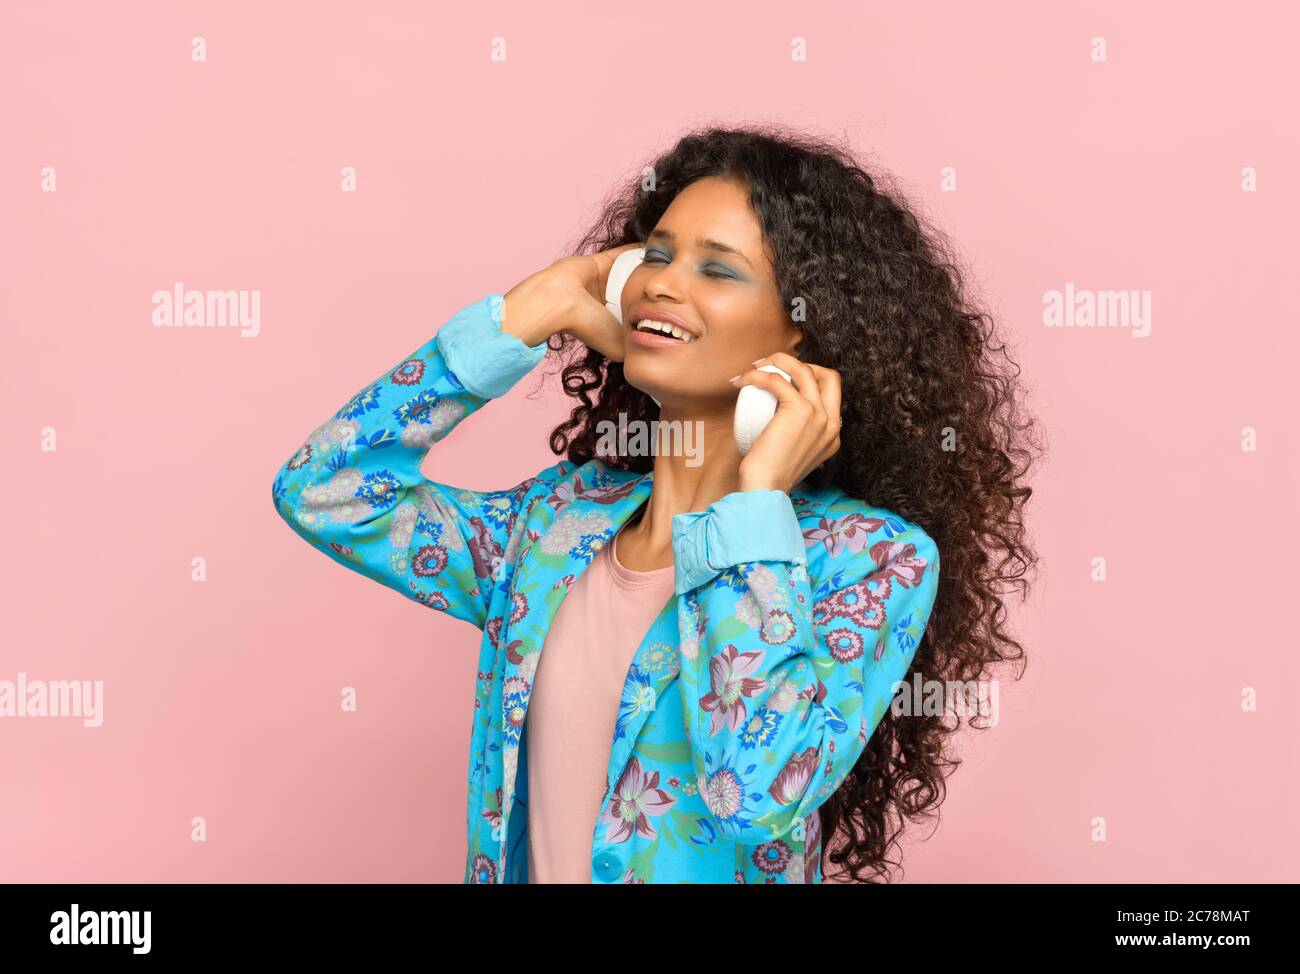 Trendy young Afro-american girl listening to music on stereo headphones with closed eyes and blissful smile against a pink studio background Stock Photo